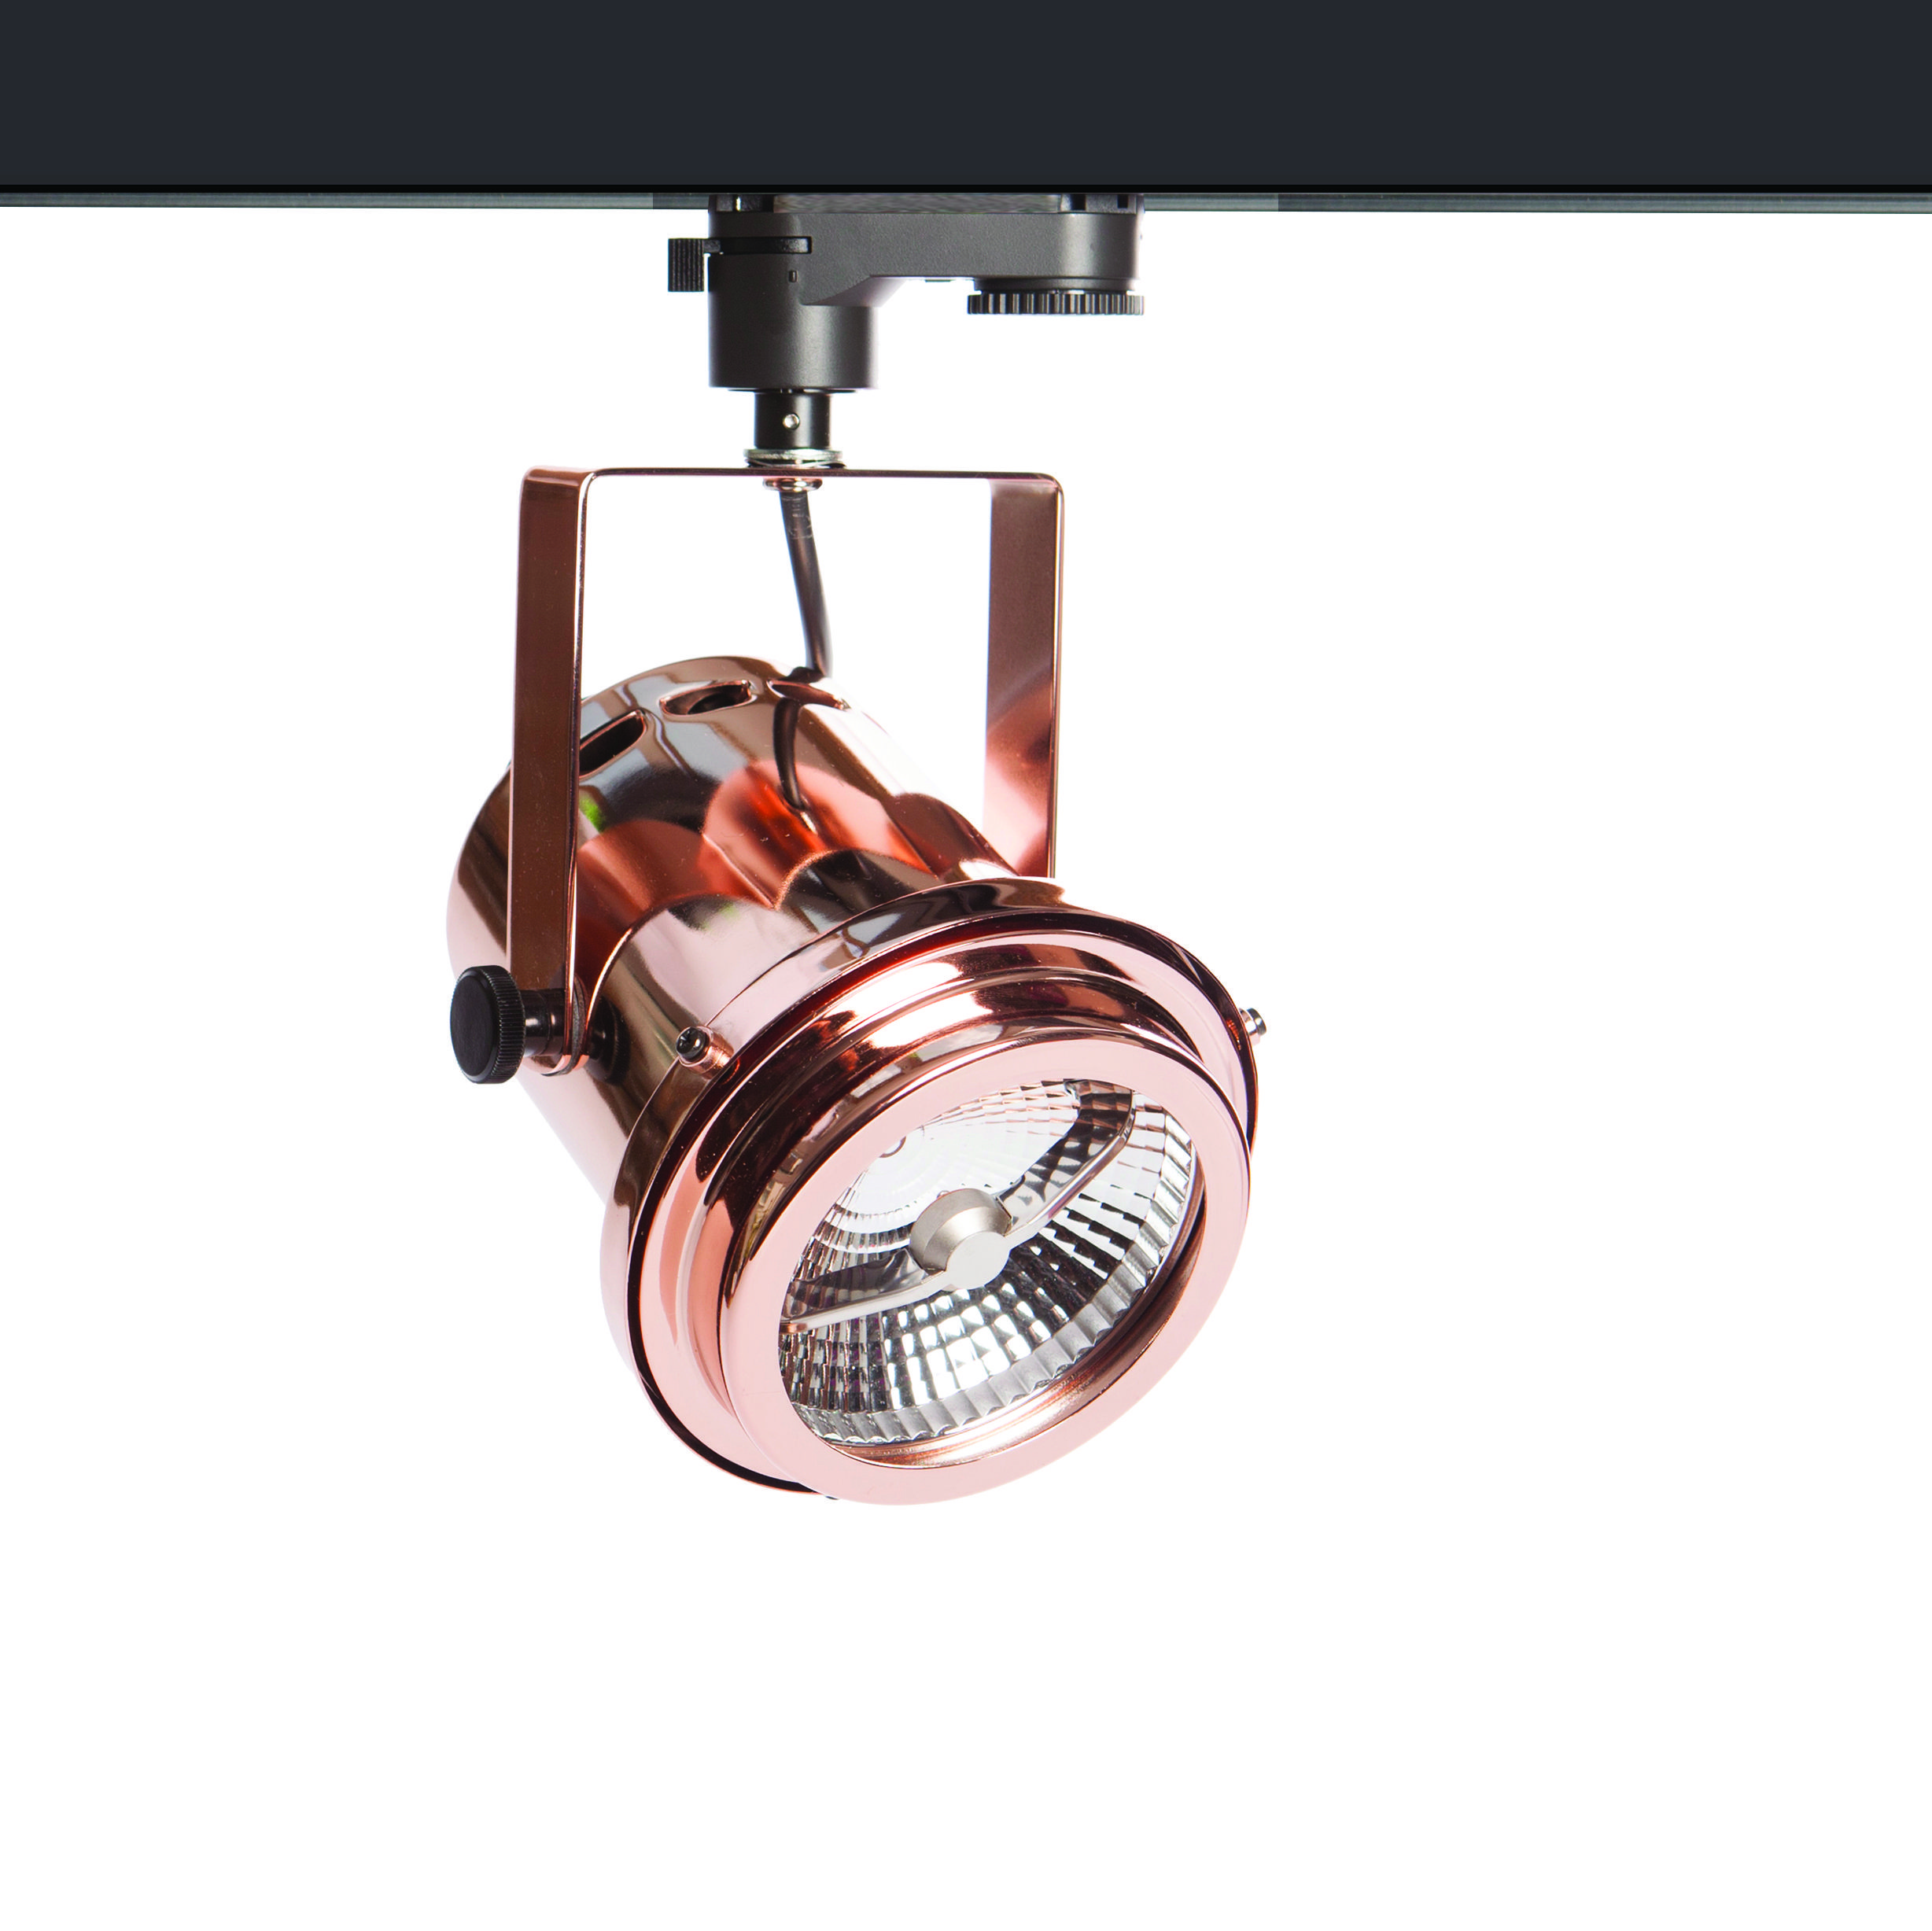 The polished copper tri pin led from photec lighting